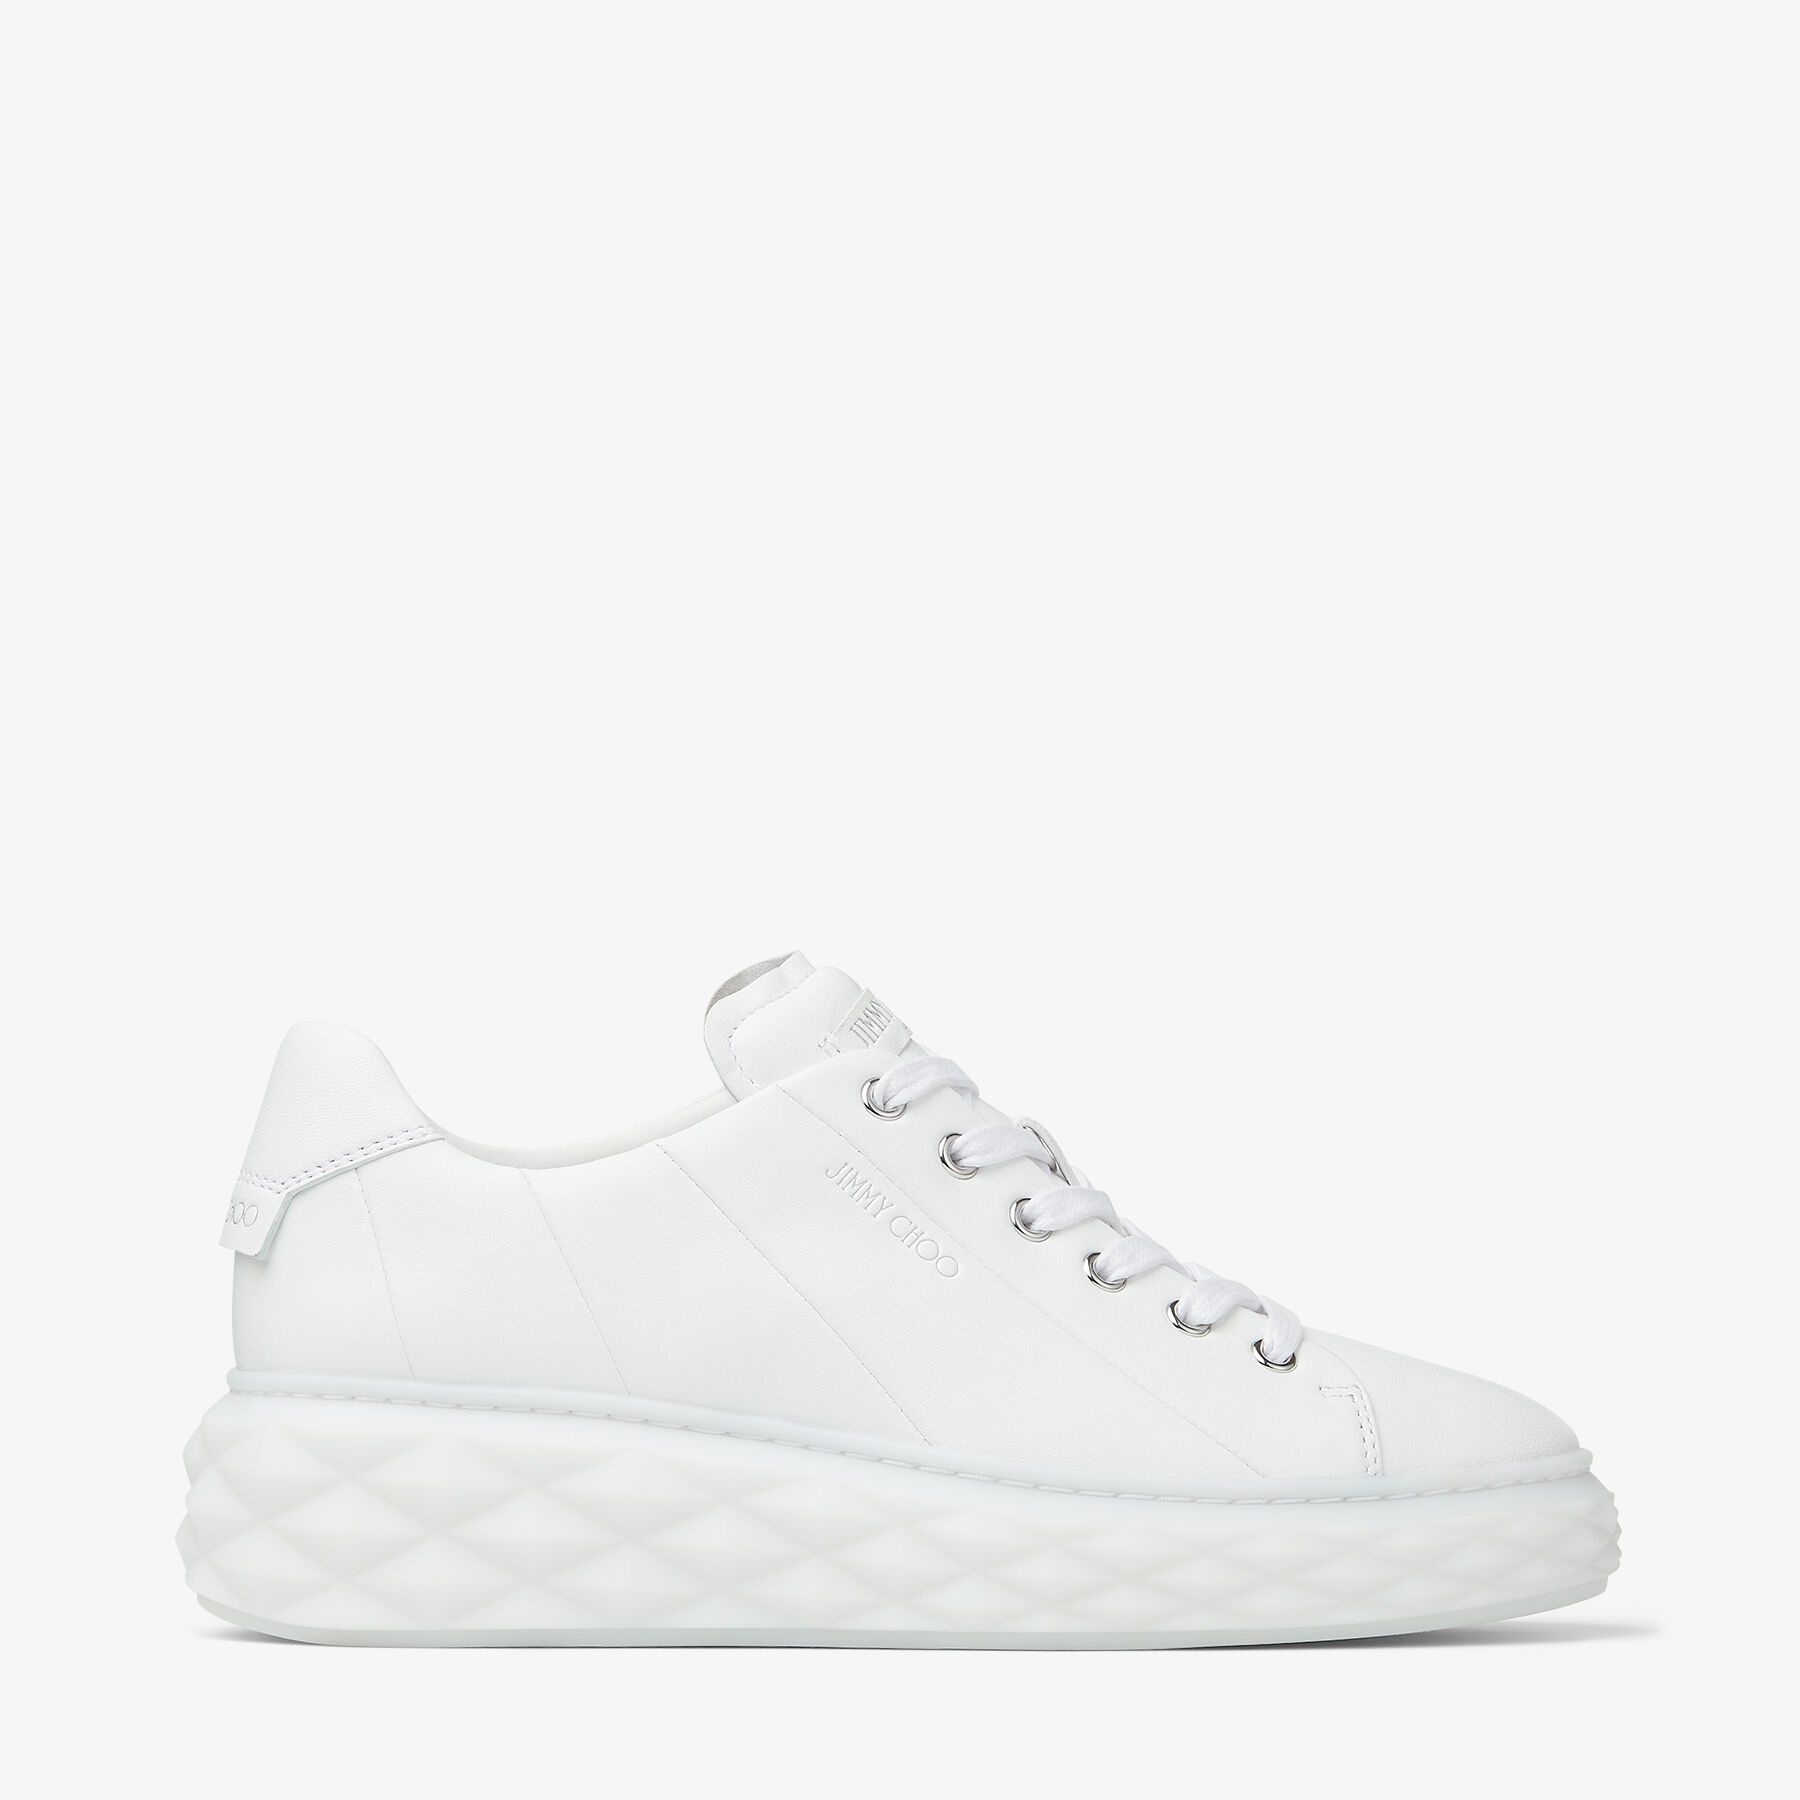 Diamond Light Maxi/F
White Nappa Leather Low-Top Trainers with Platform Sole - 1